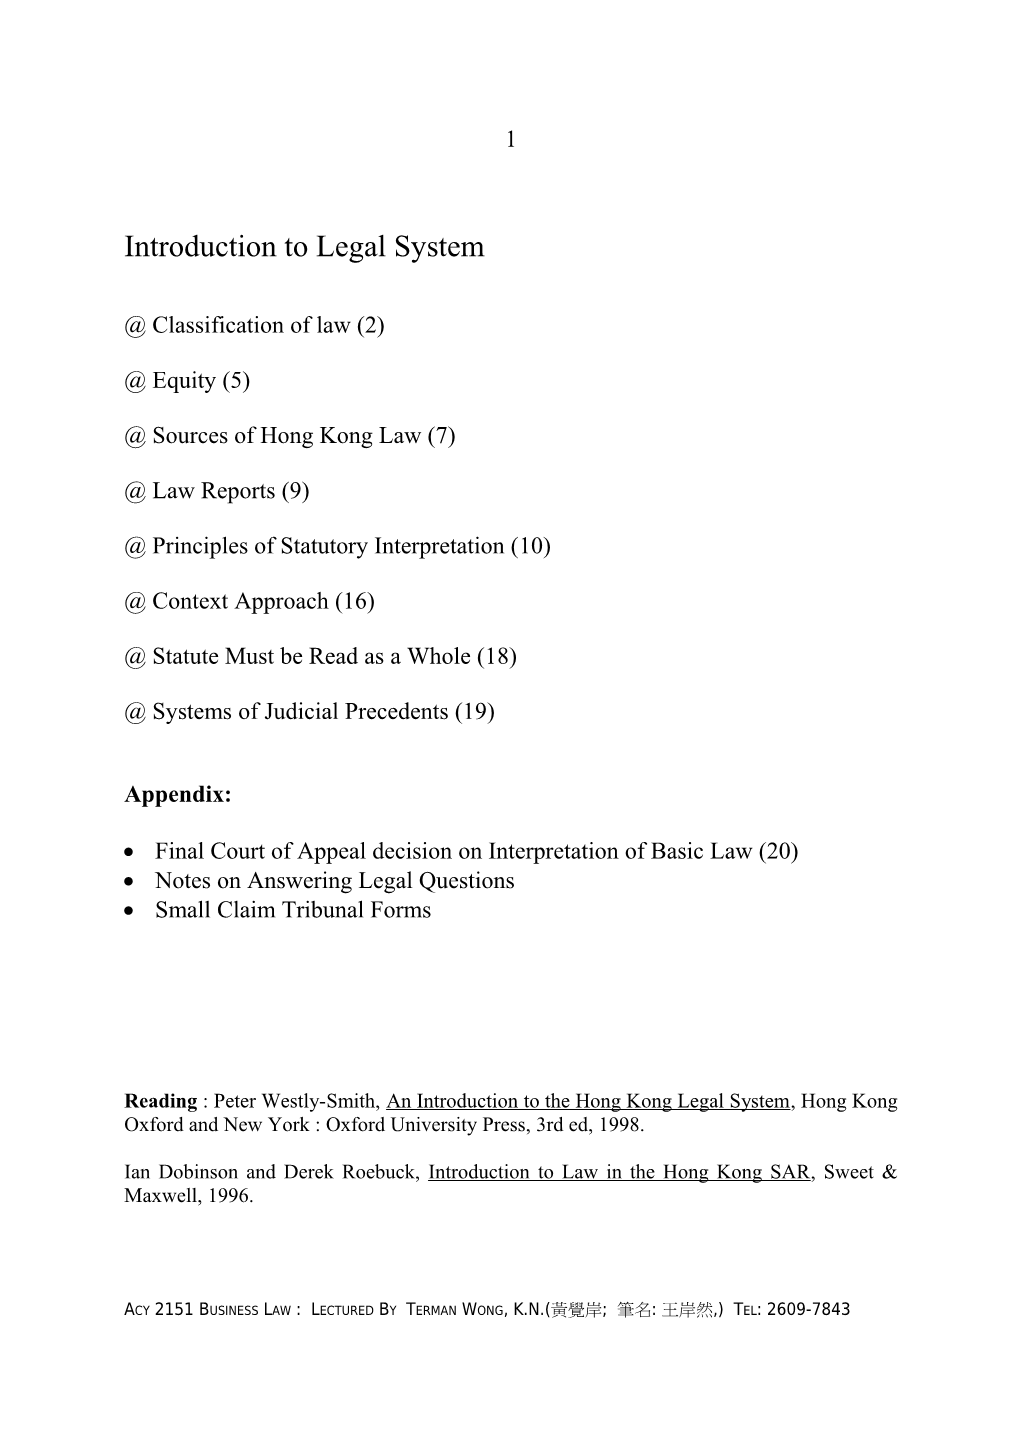 Introduction to Legal System